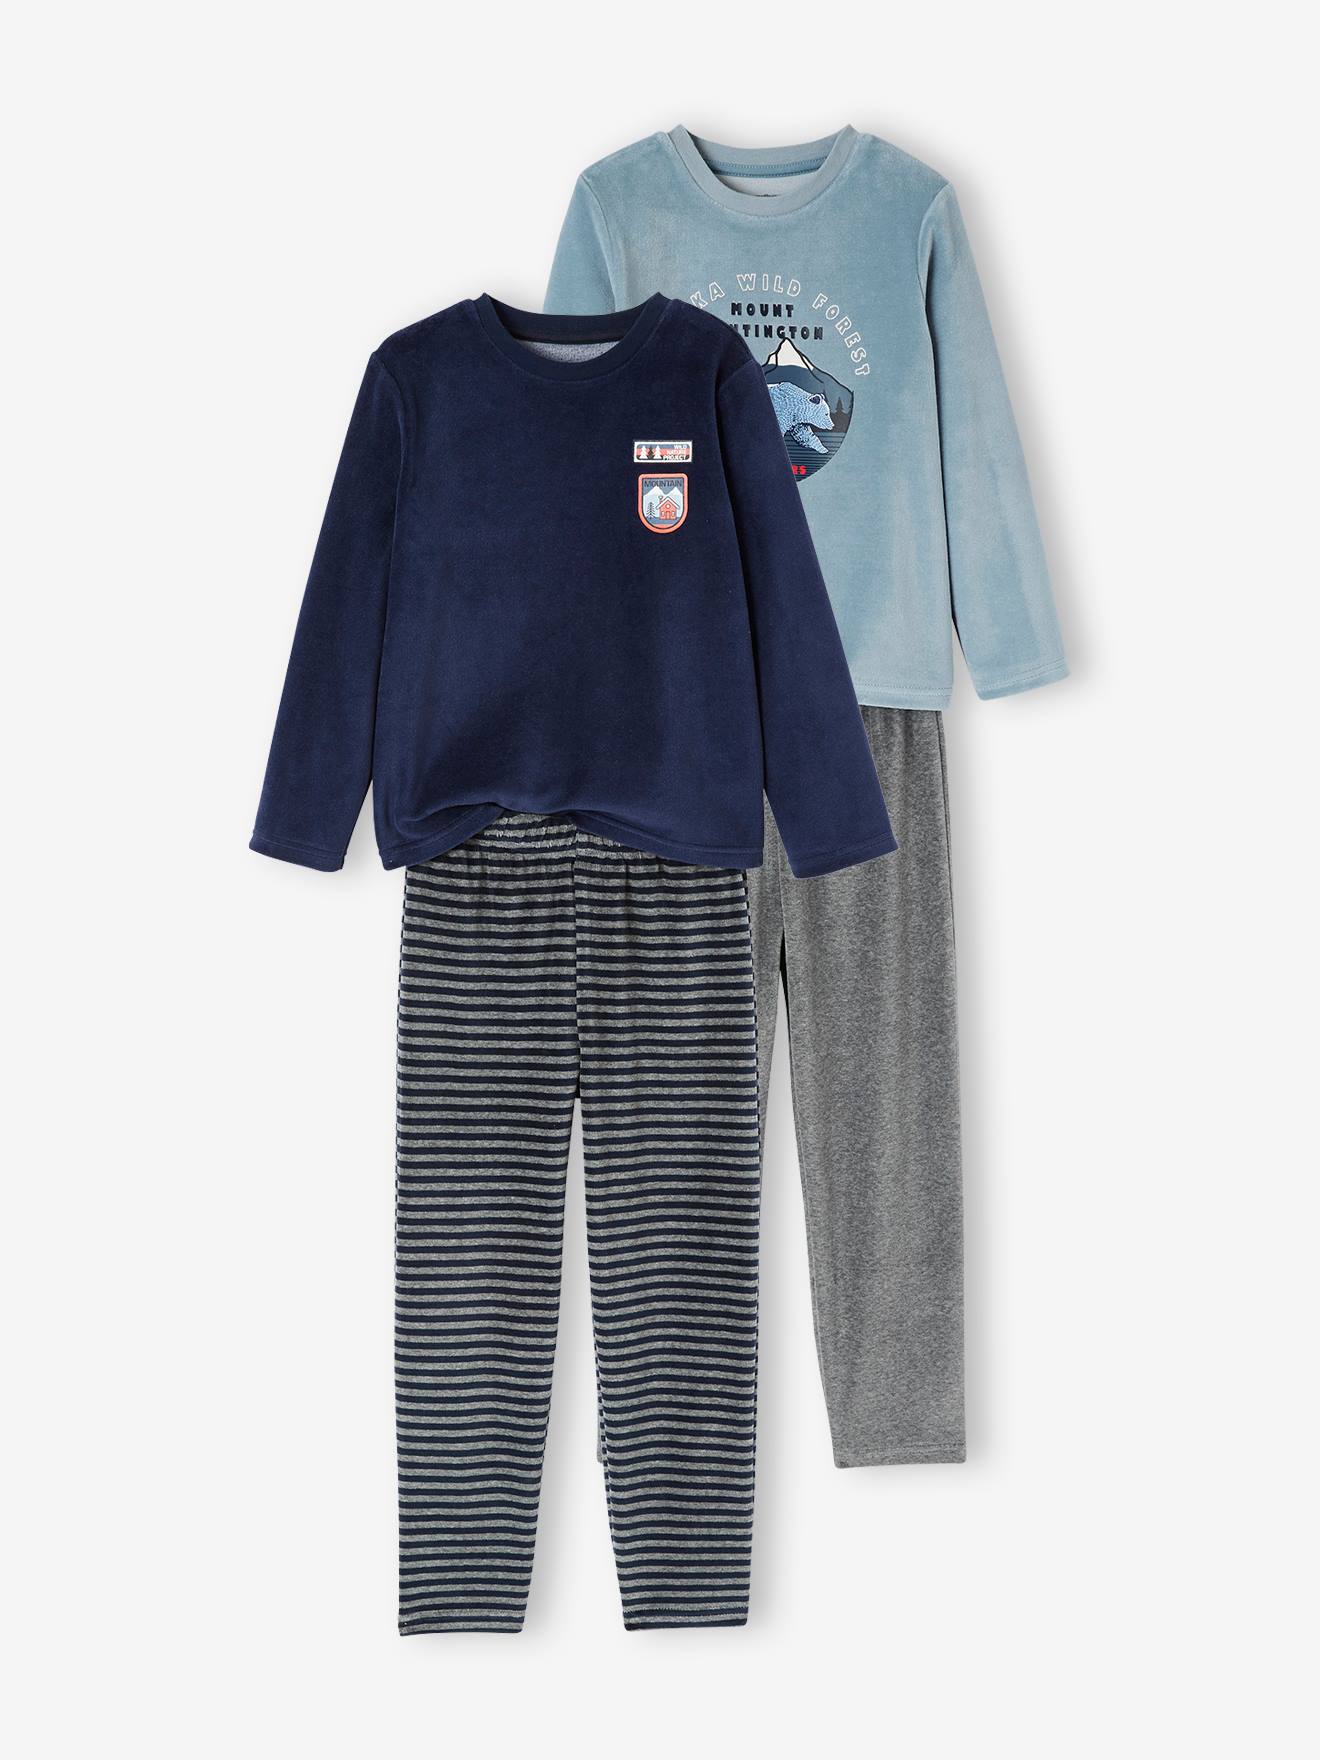 Pack of 2 "Nature" Pyjamas in Velour for Boys blue dark solid with design